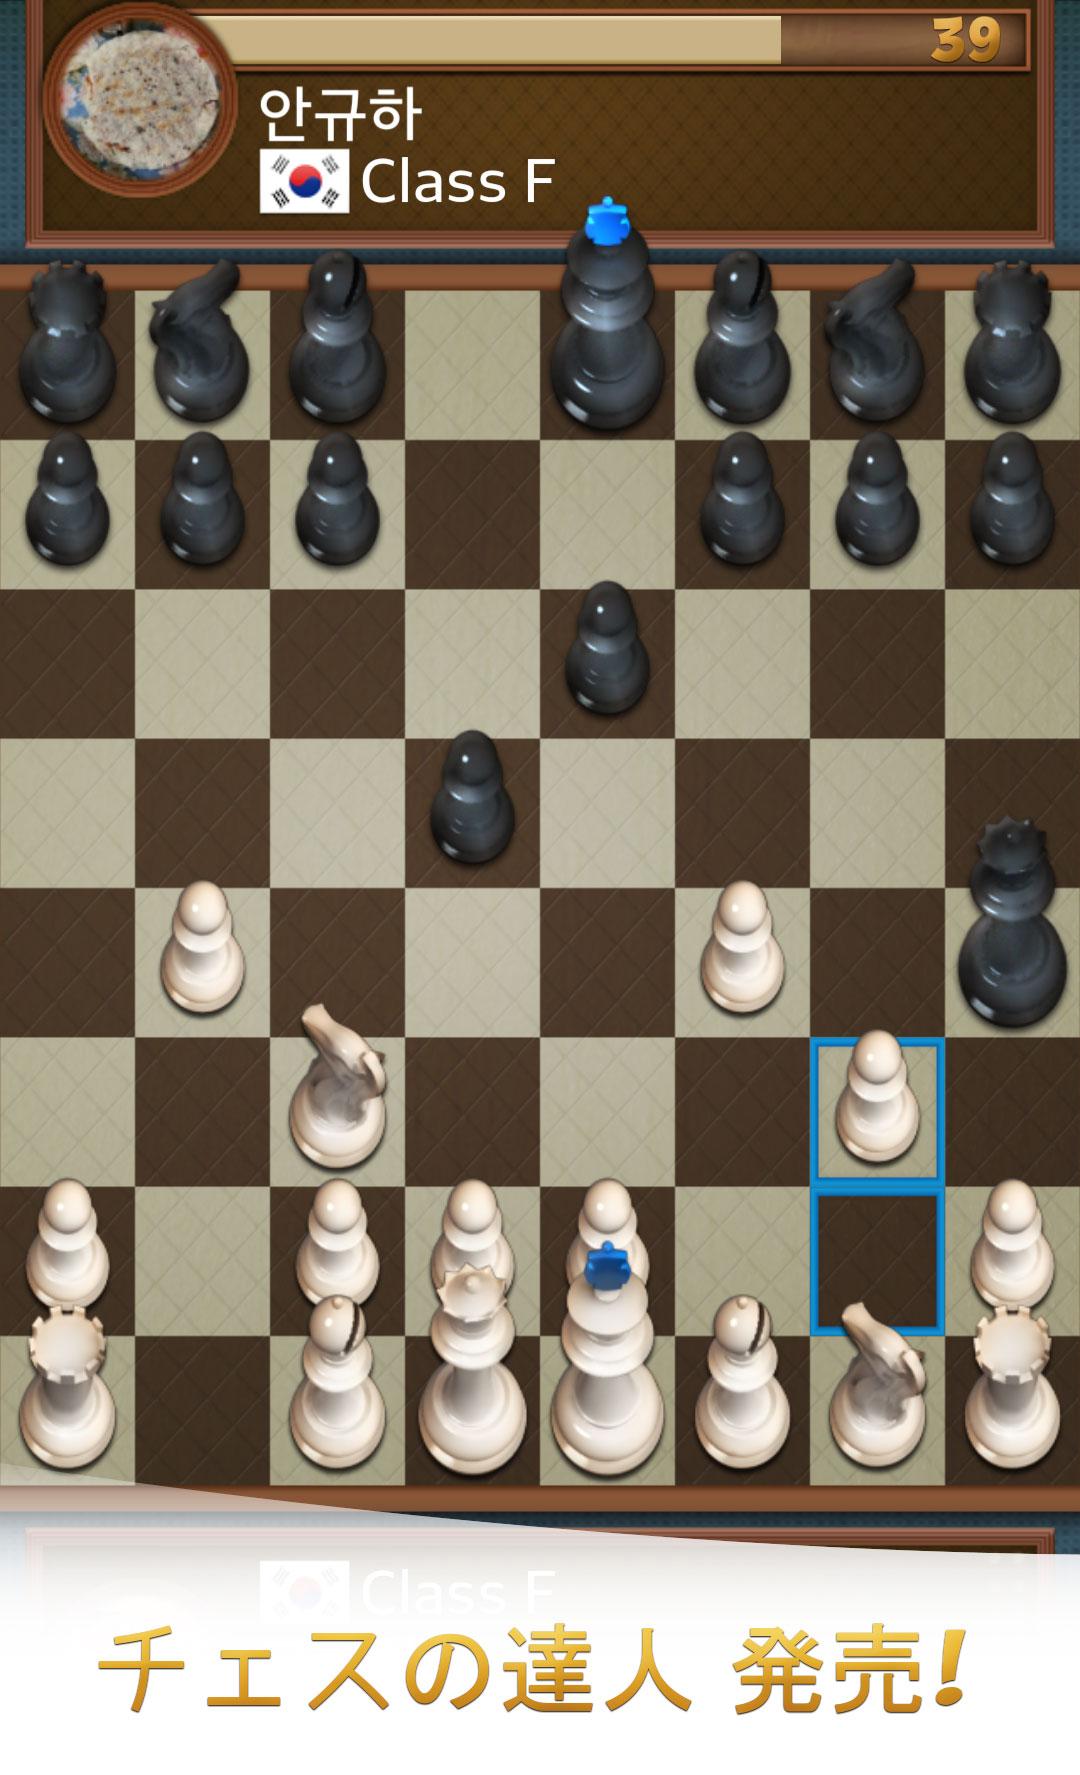 Android application Dr. Chess screenshort